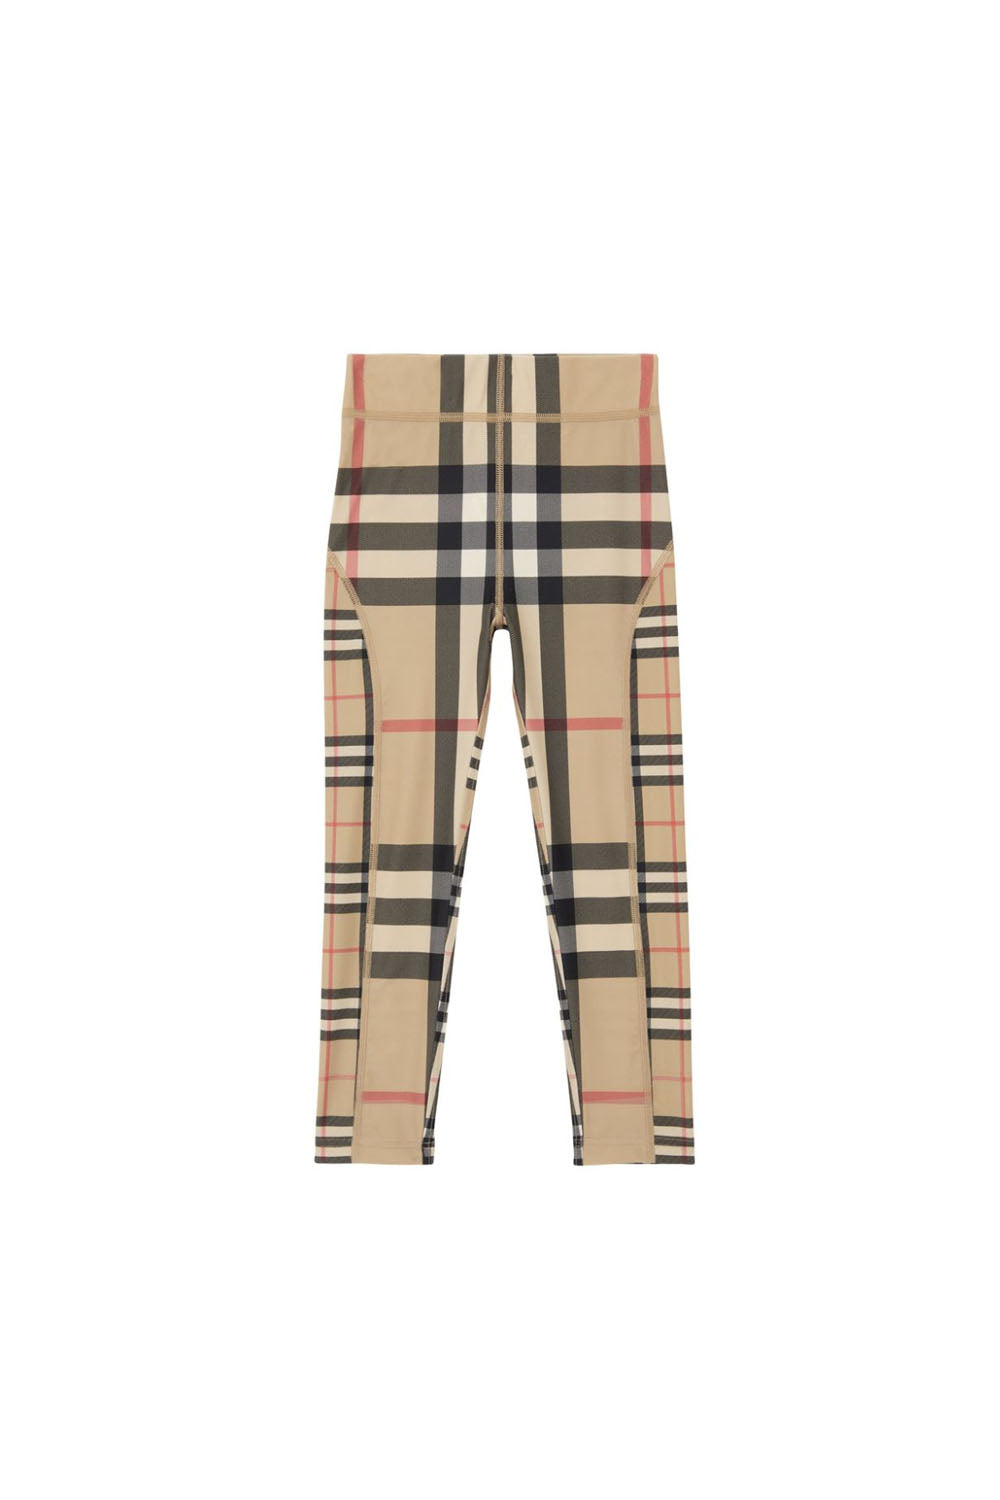 Trousers Isabella Check for Girls - Maison7